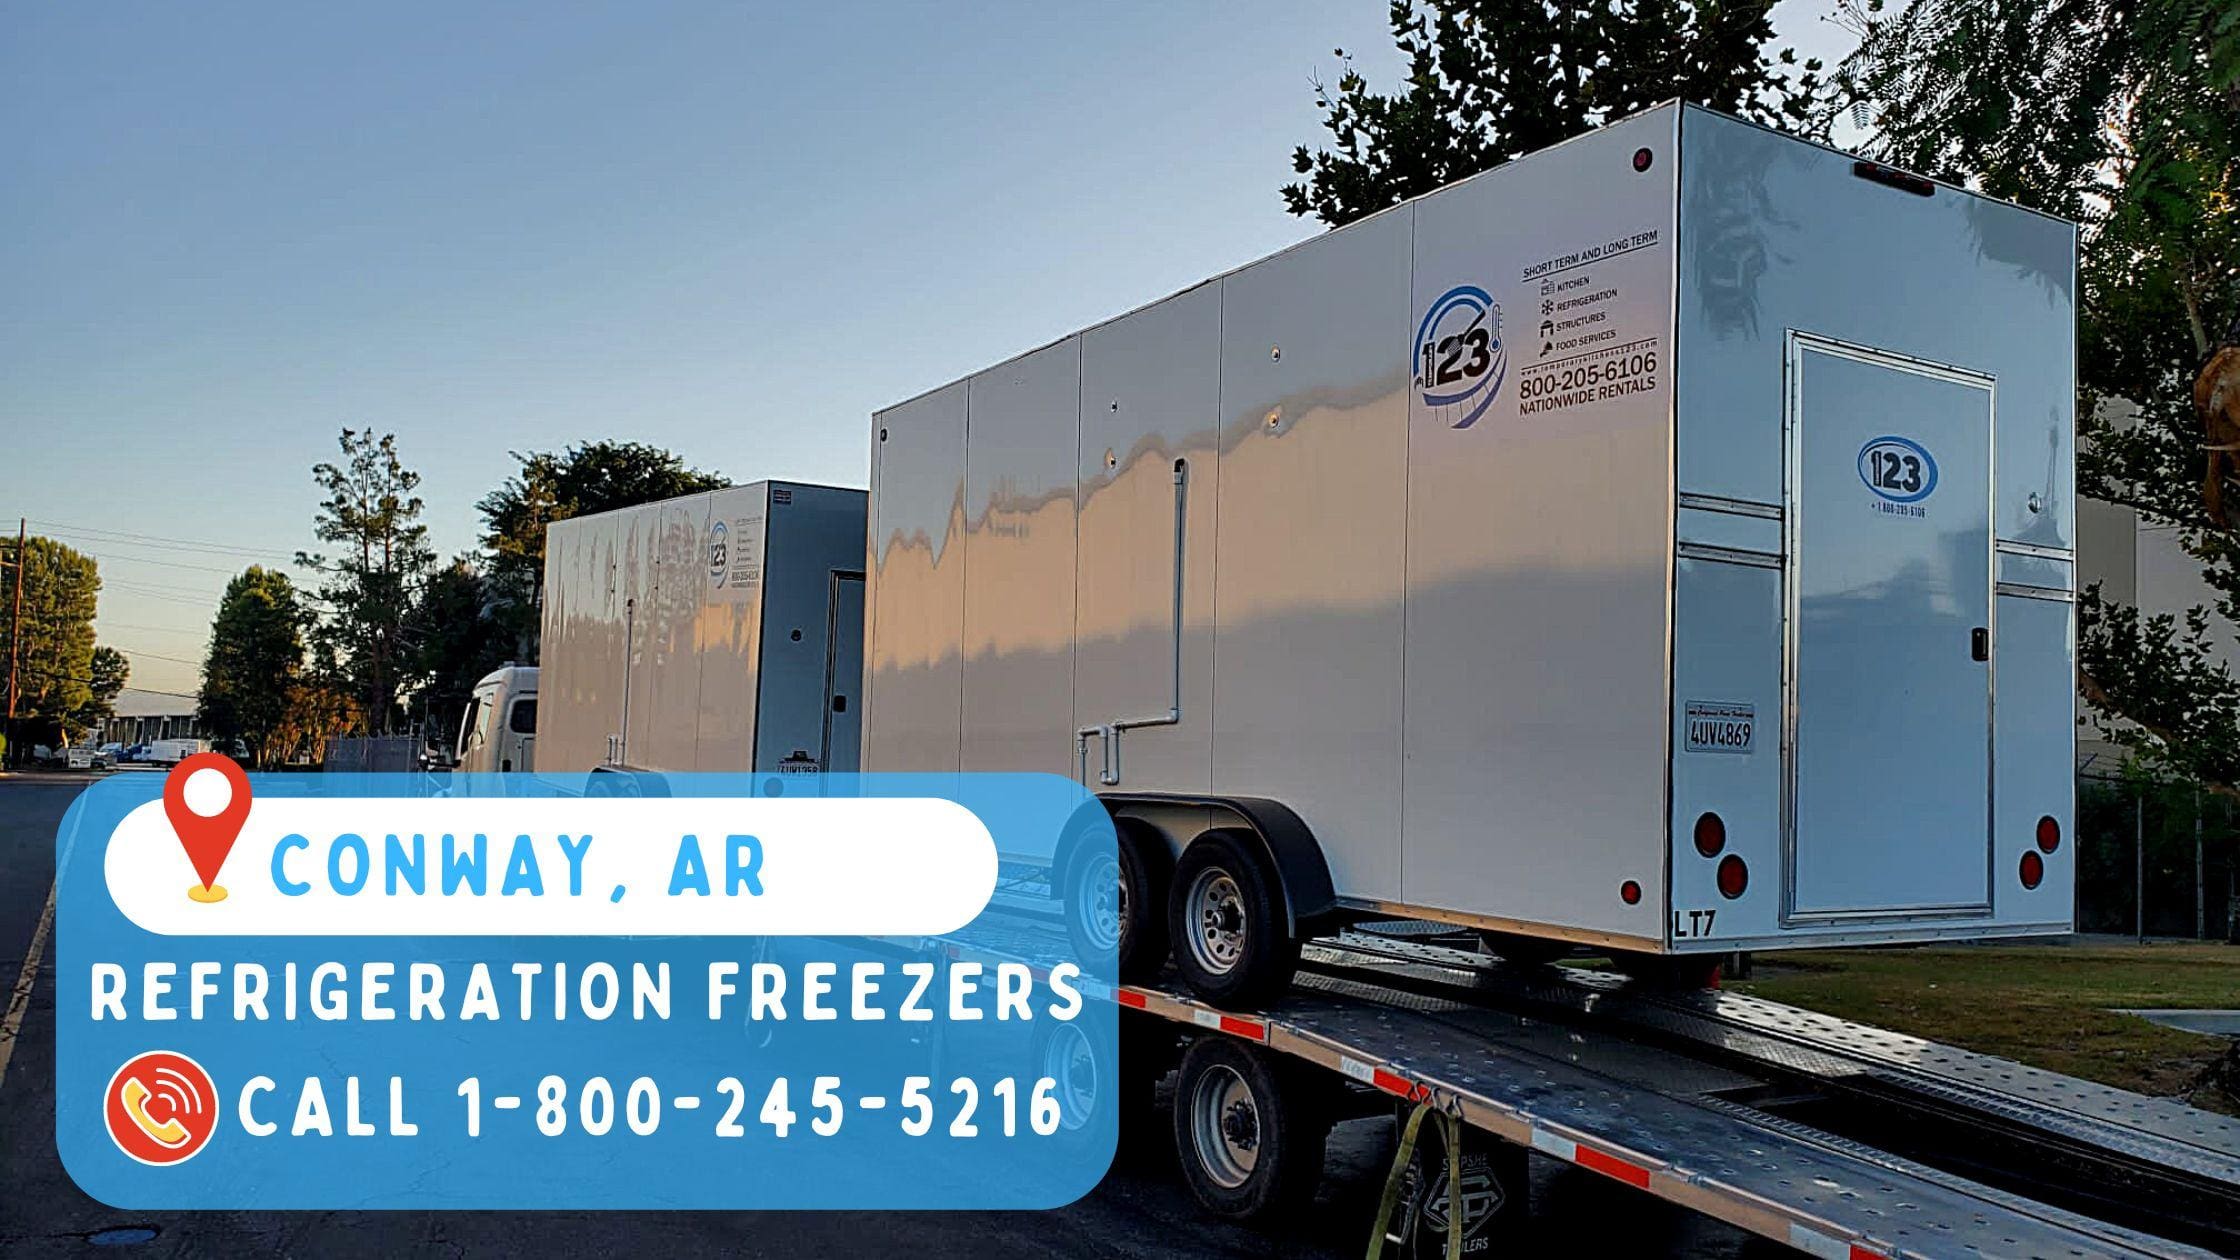 Refrigeration Freezers in Conway, AR